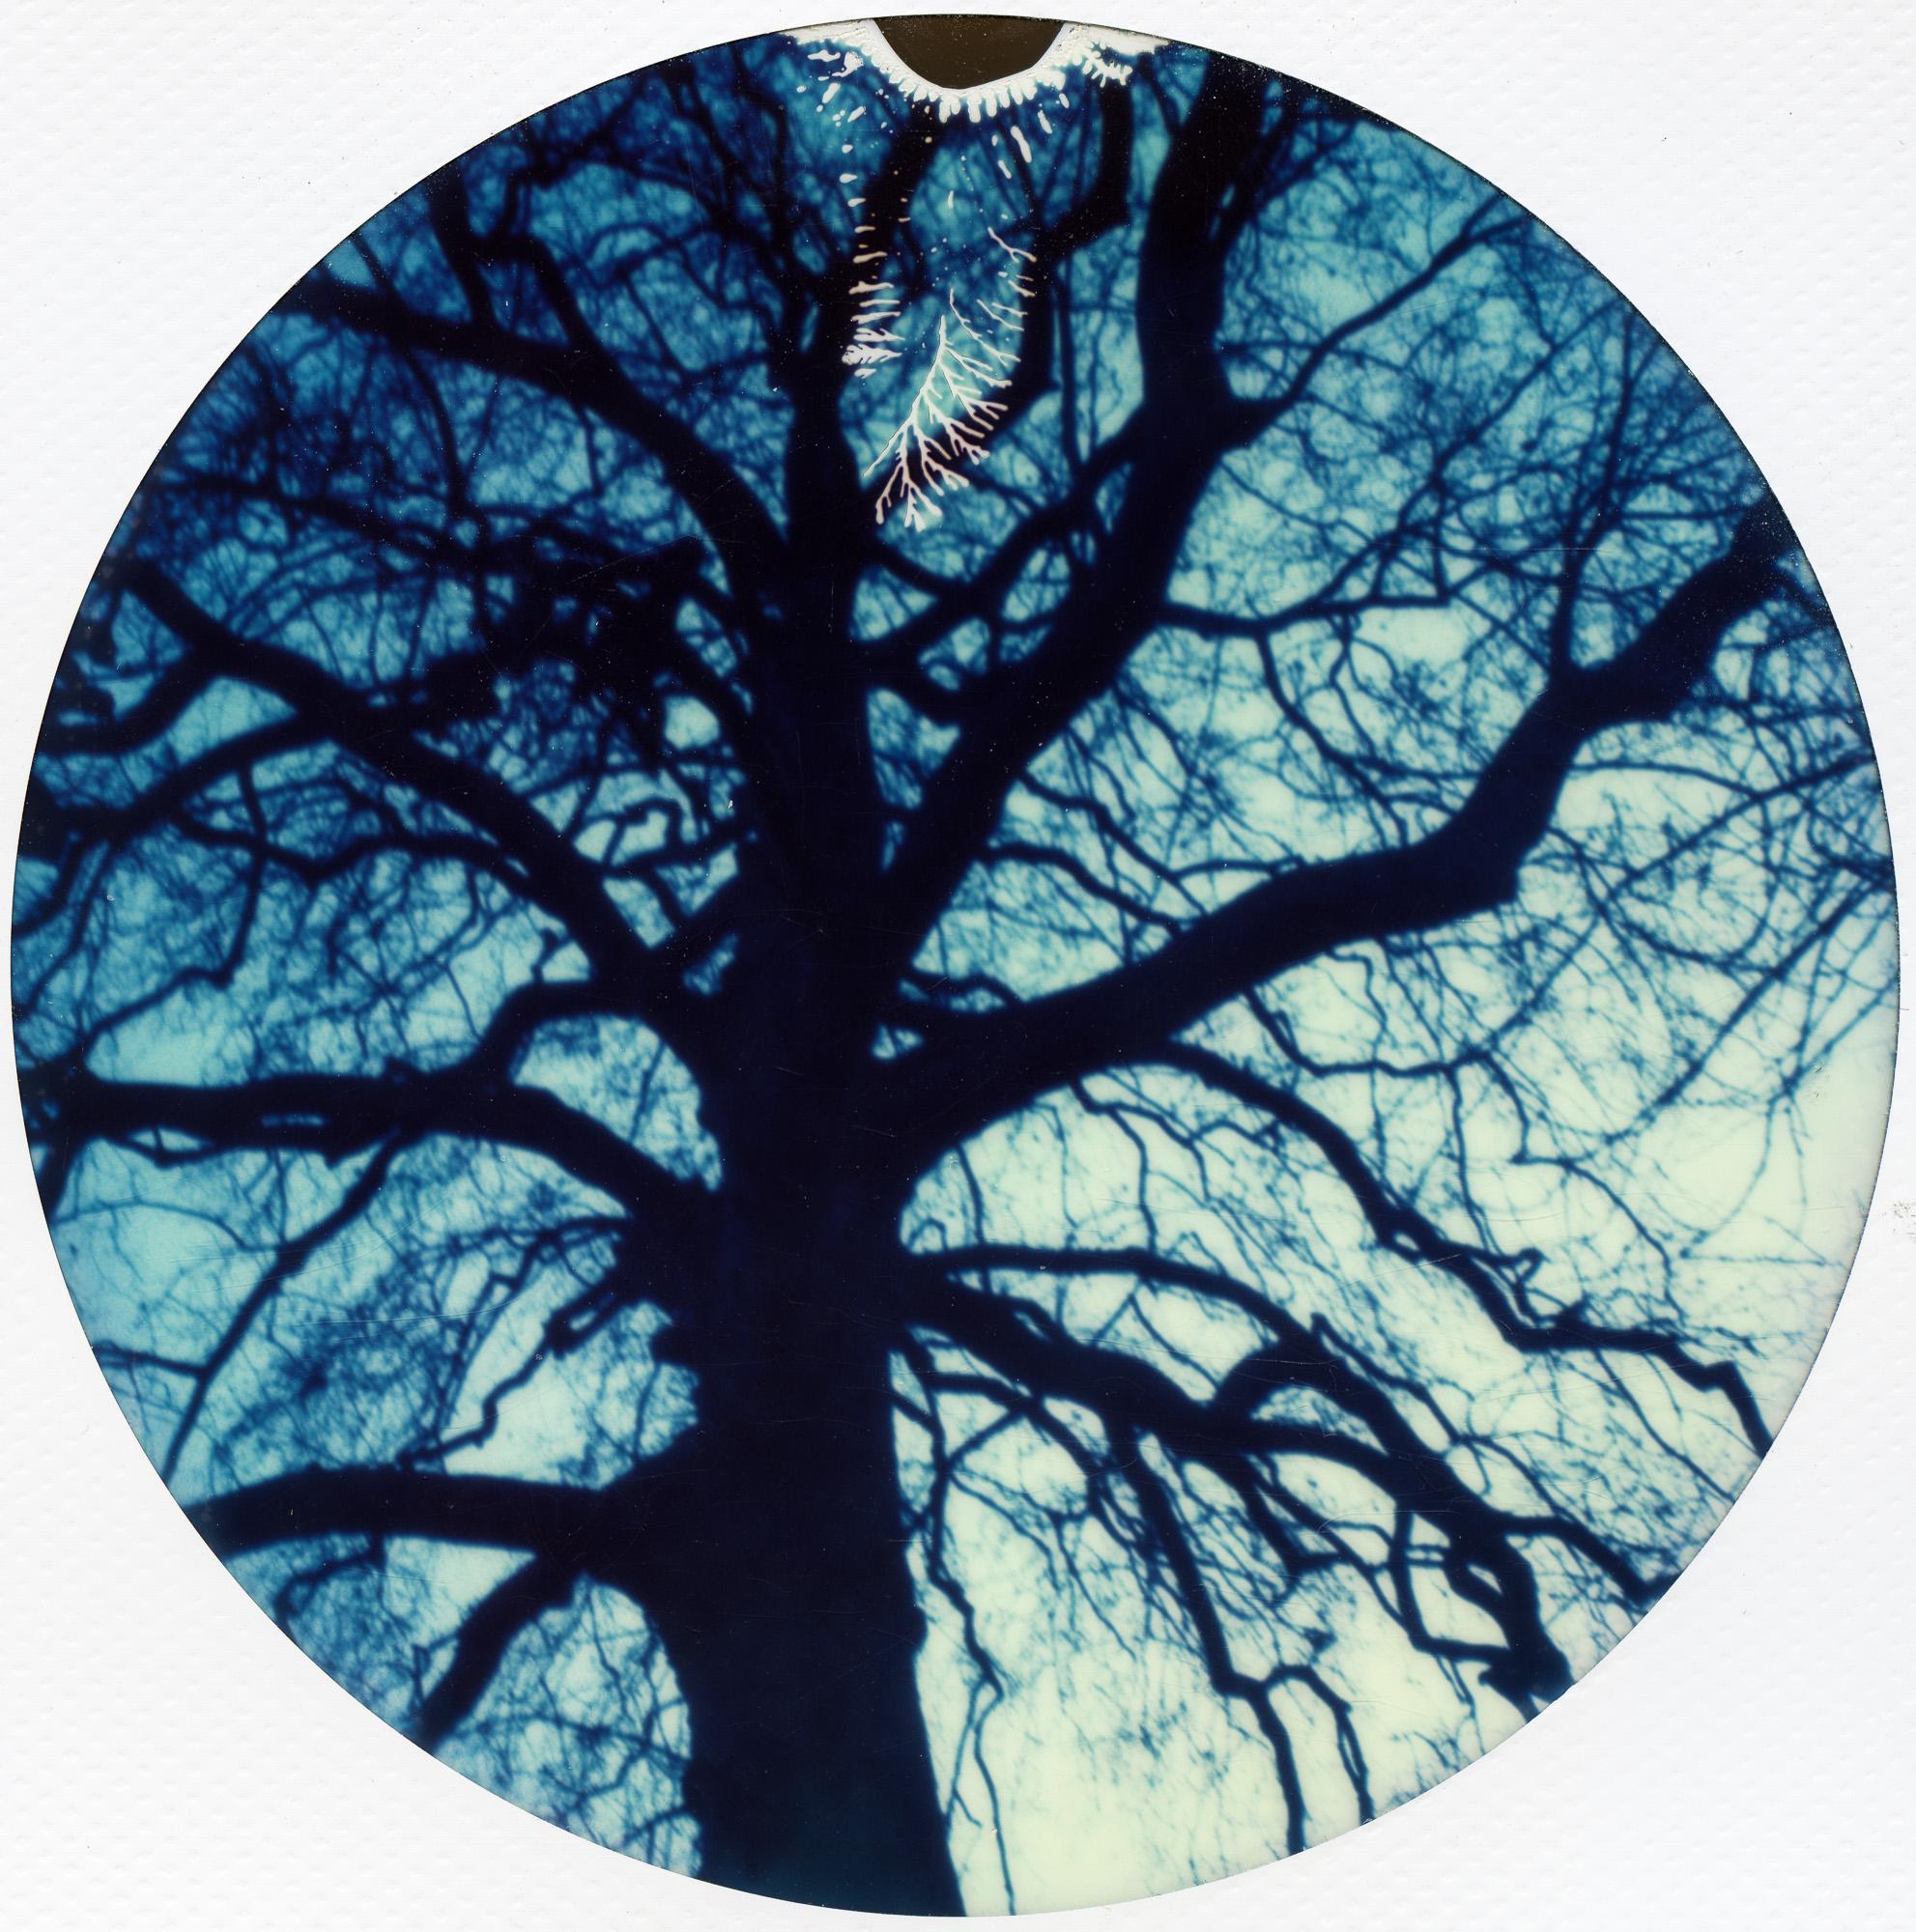 Branching Out - Polaroid, Contemporary, 21st Century